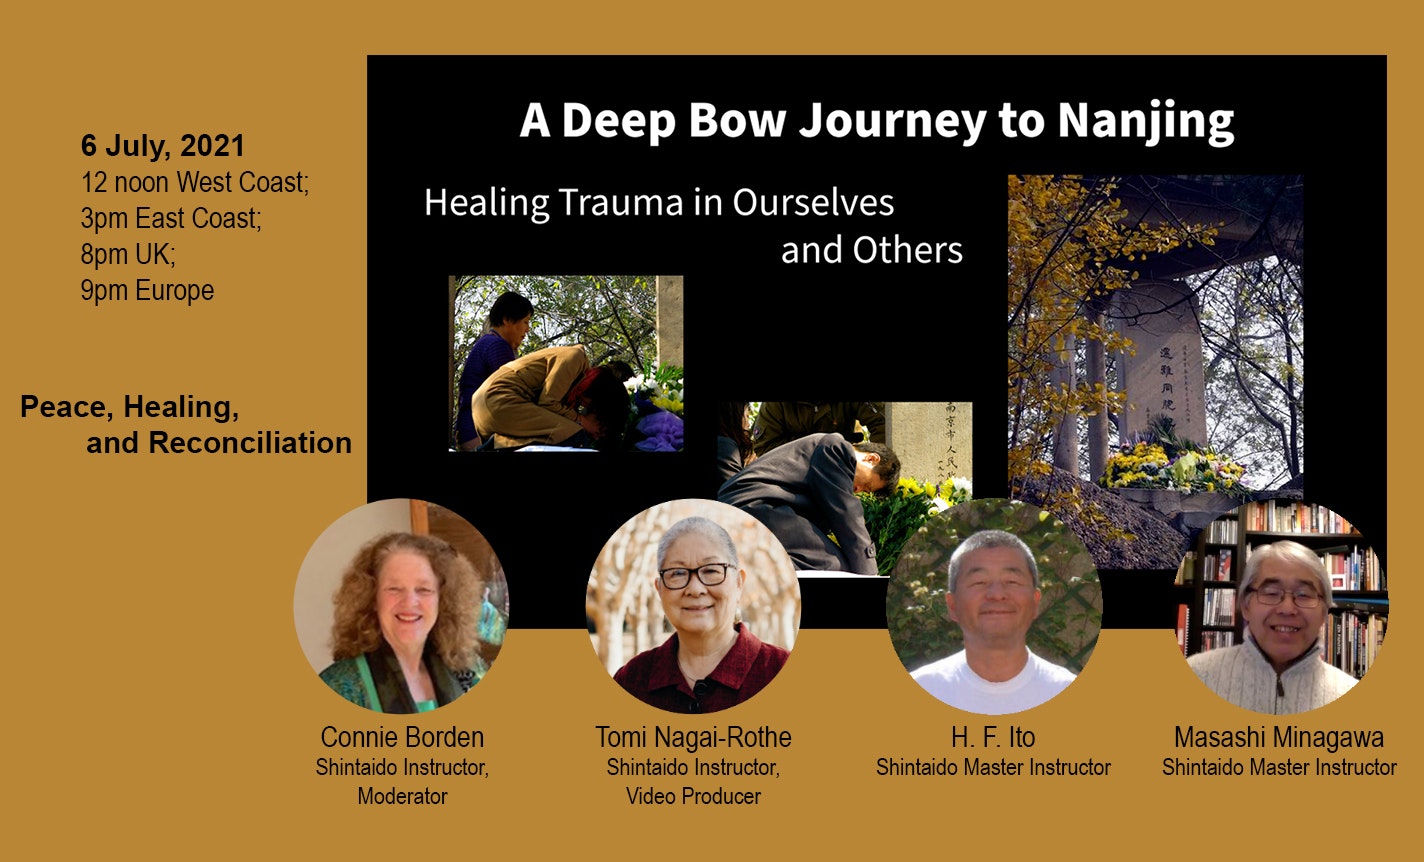 A Deep Bow Journey: Healing Trauma in Ourselves and Others